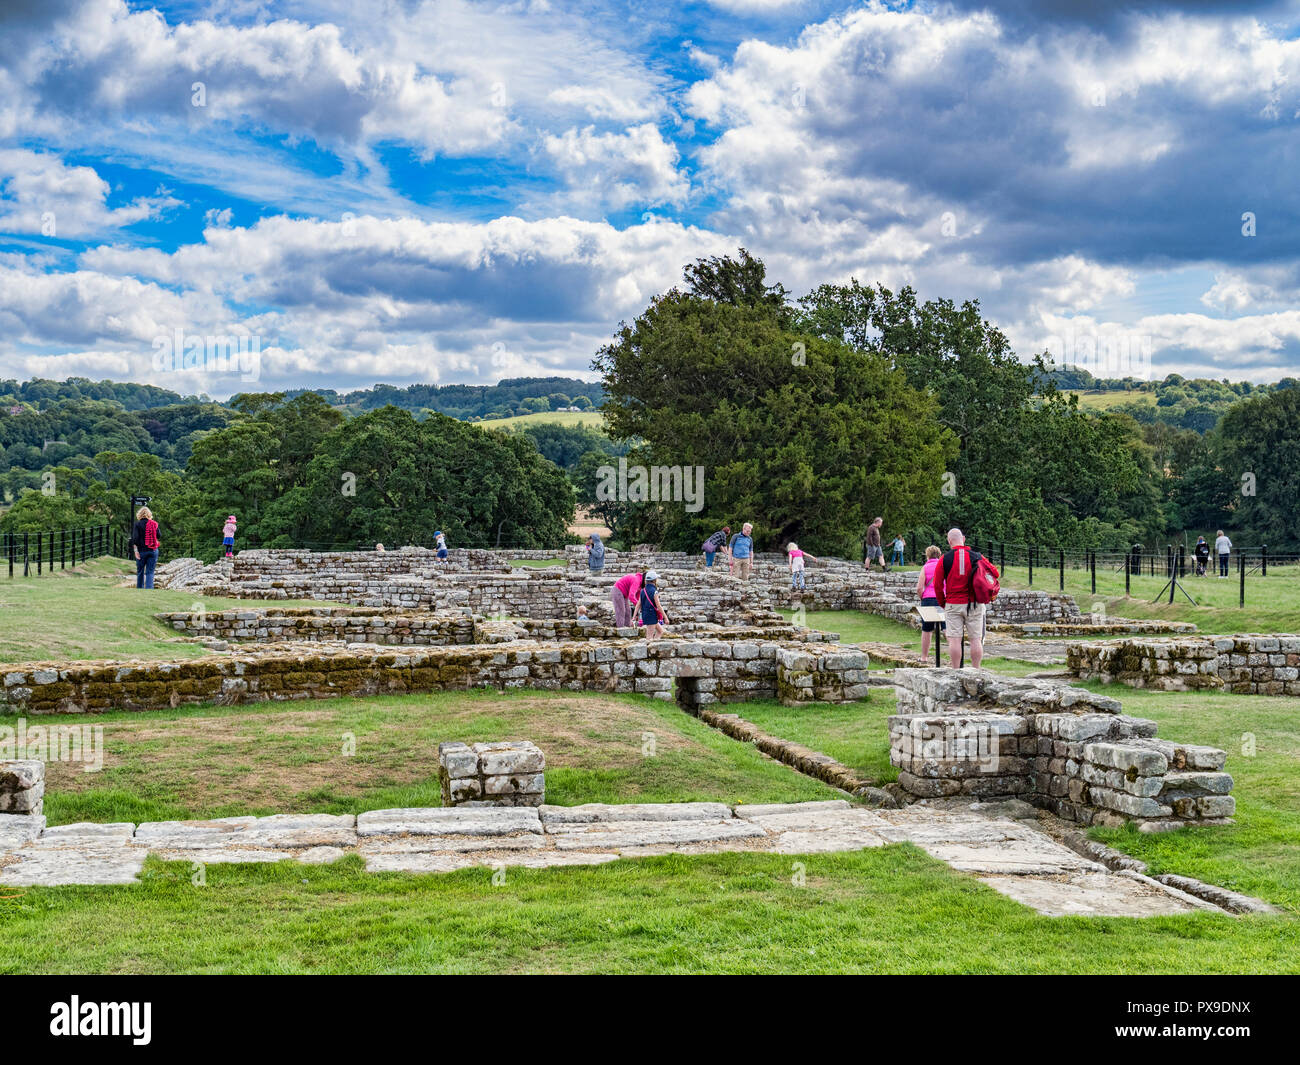 11 August 2018: Tourists viewing the excavated ruins of Chesters Roman Fort, Hadrian's Wall, Northumberland, UK Stock Photo